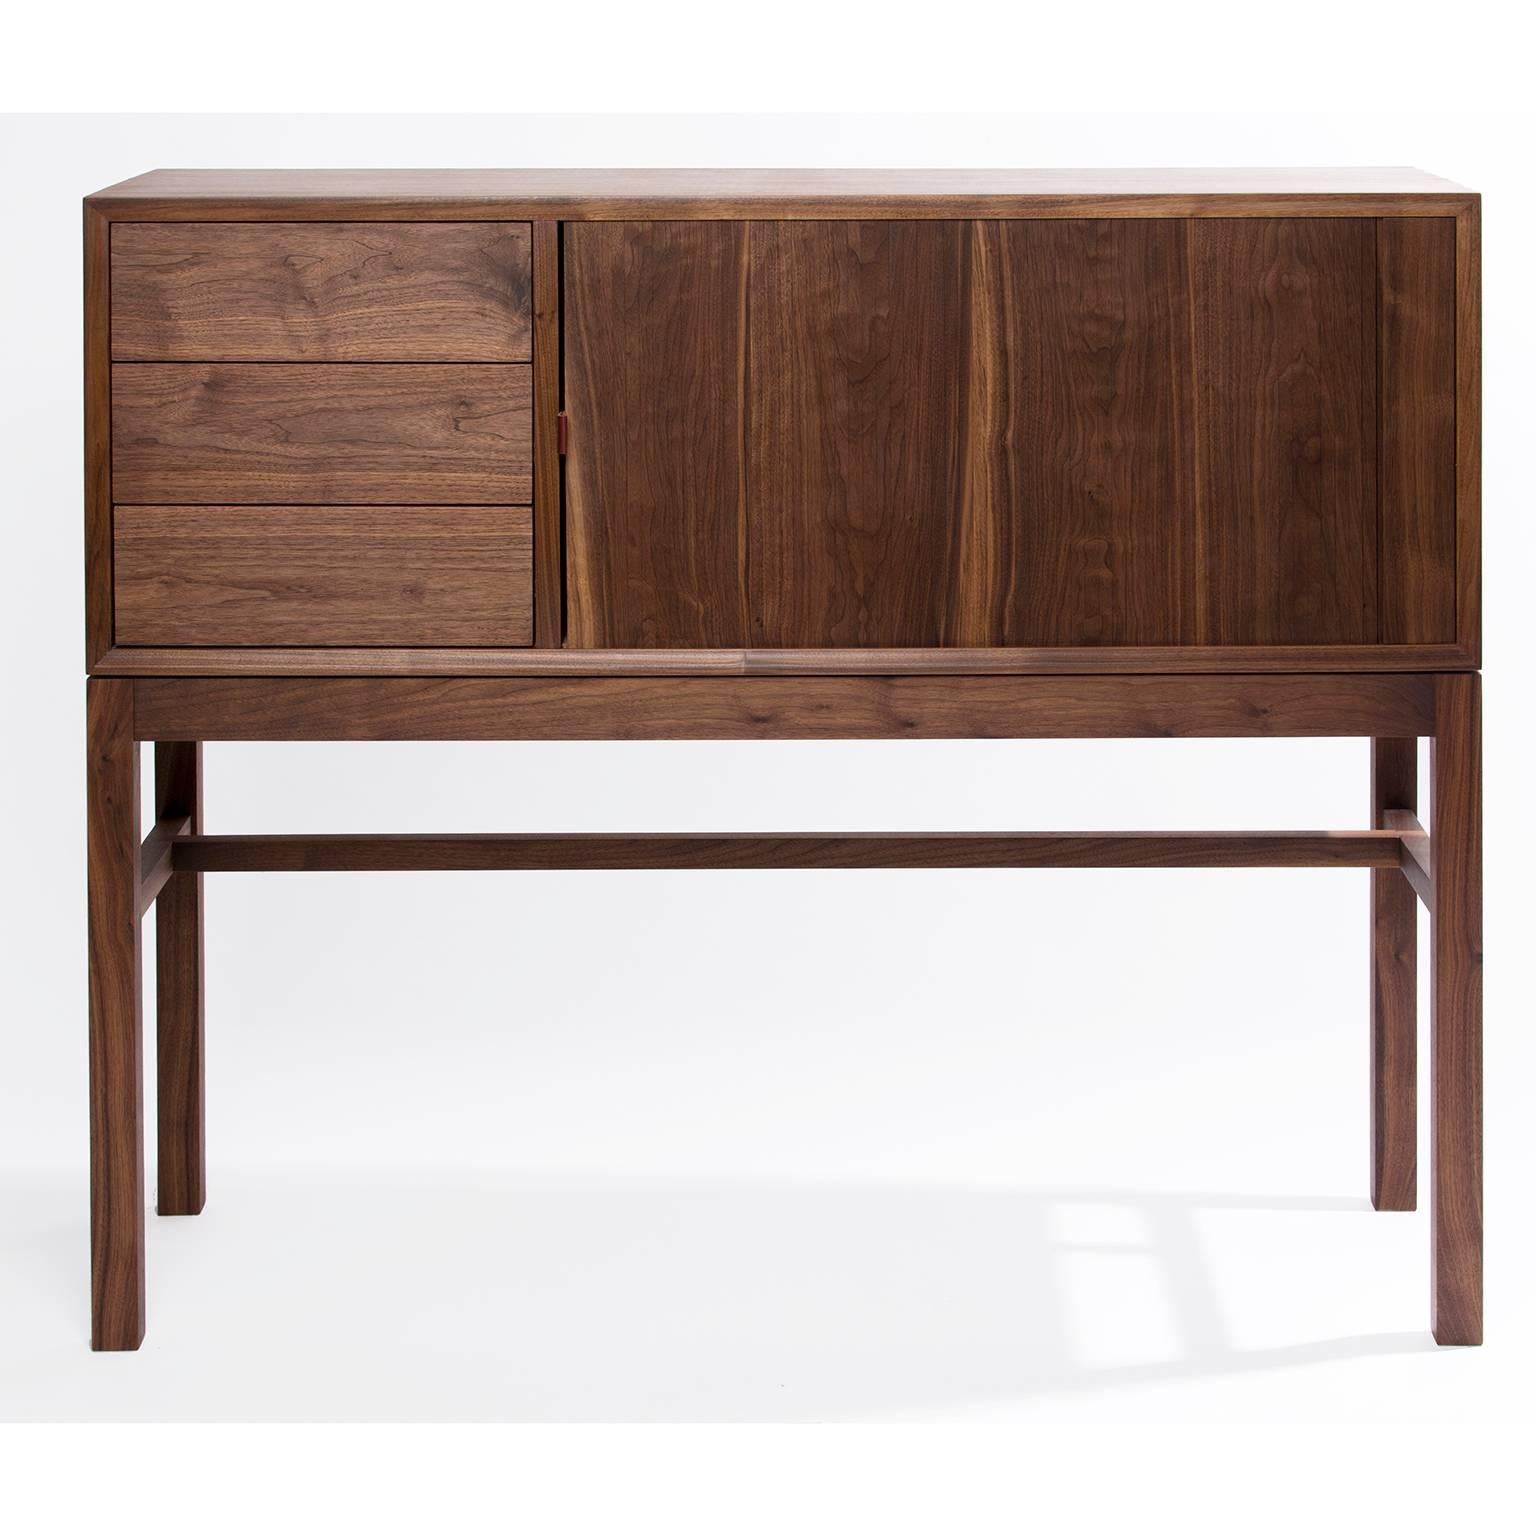 North American Beacon Cabinet 'Sideboard' in Walnut with Tambour Door, Leather Pulls